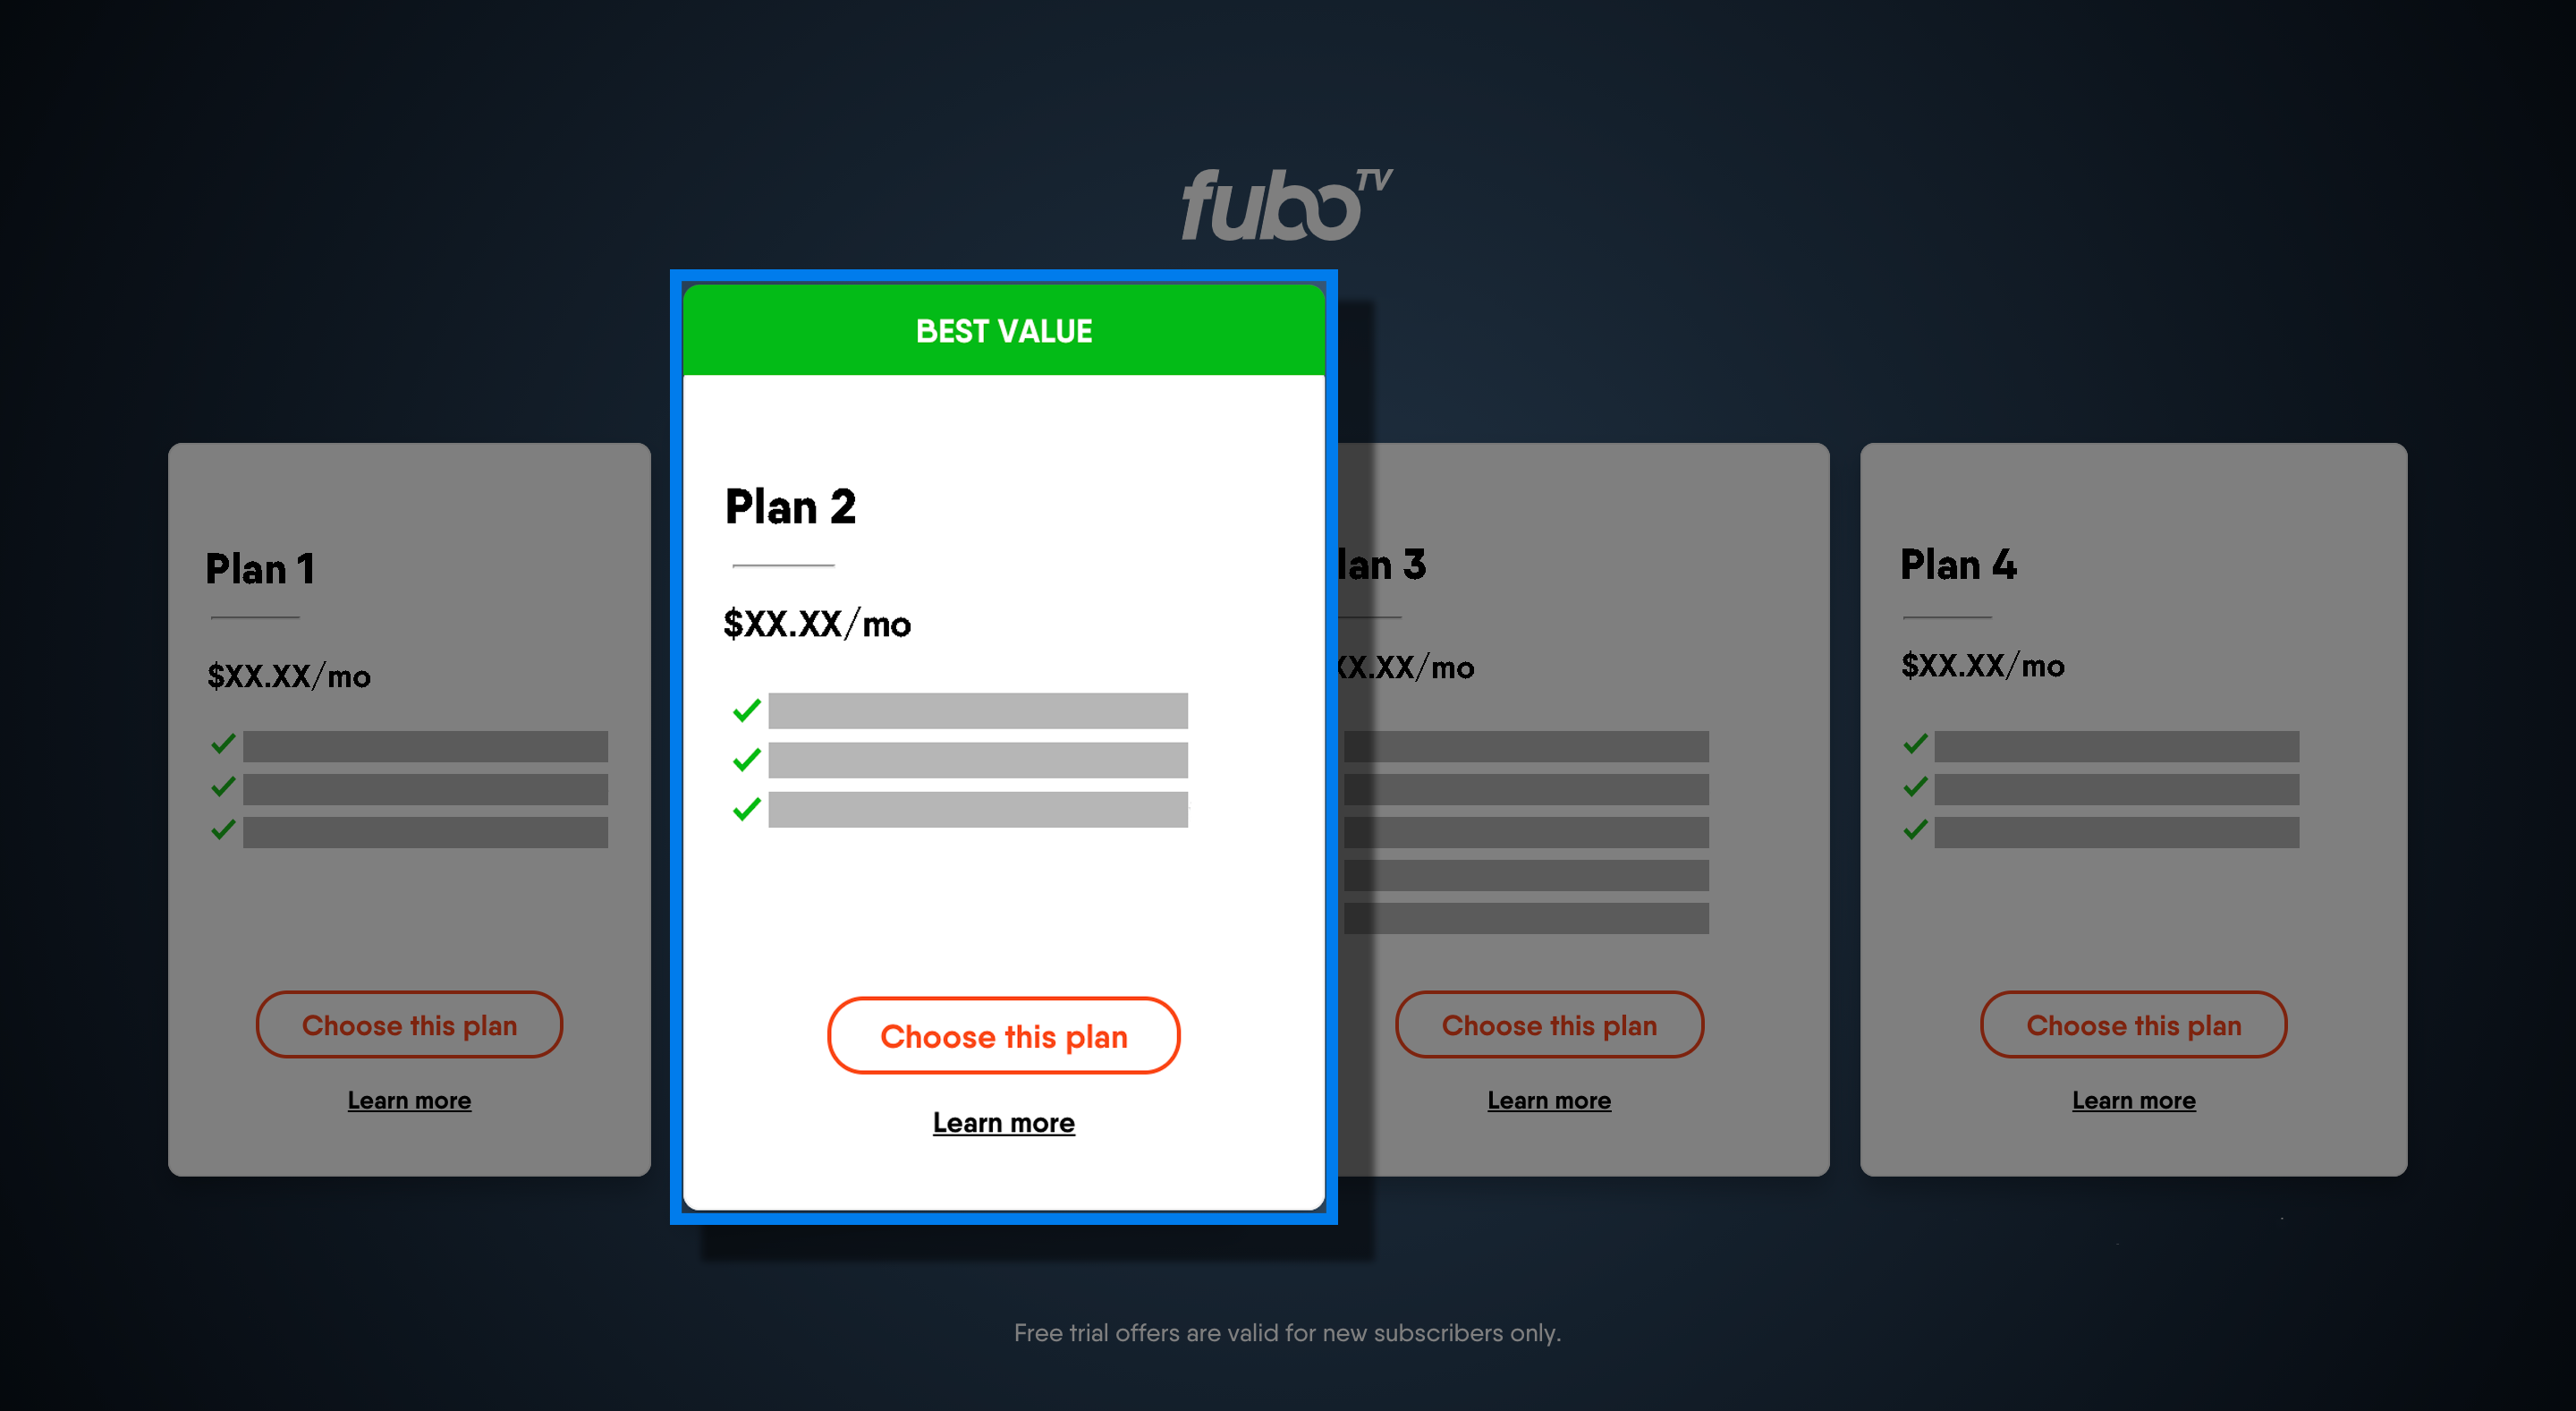 Fubo generic plan selection page seen when reactivating an account and changing base subscription